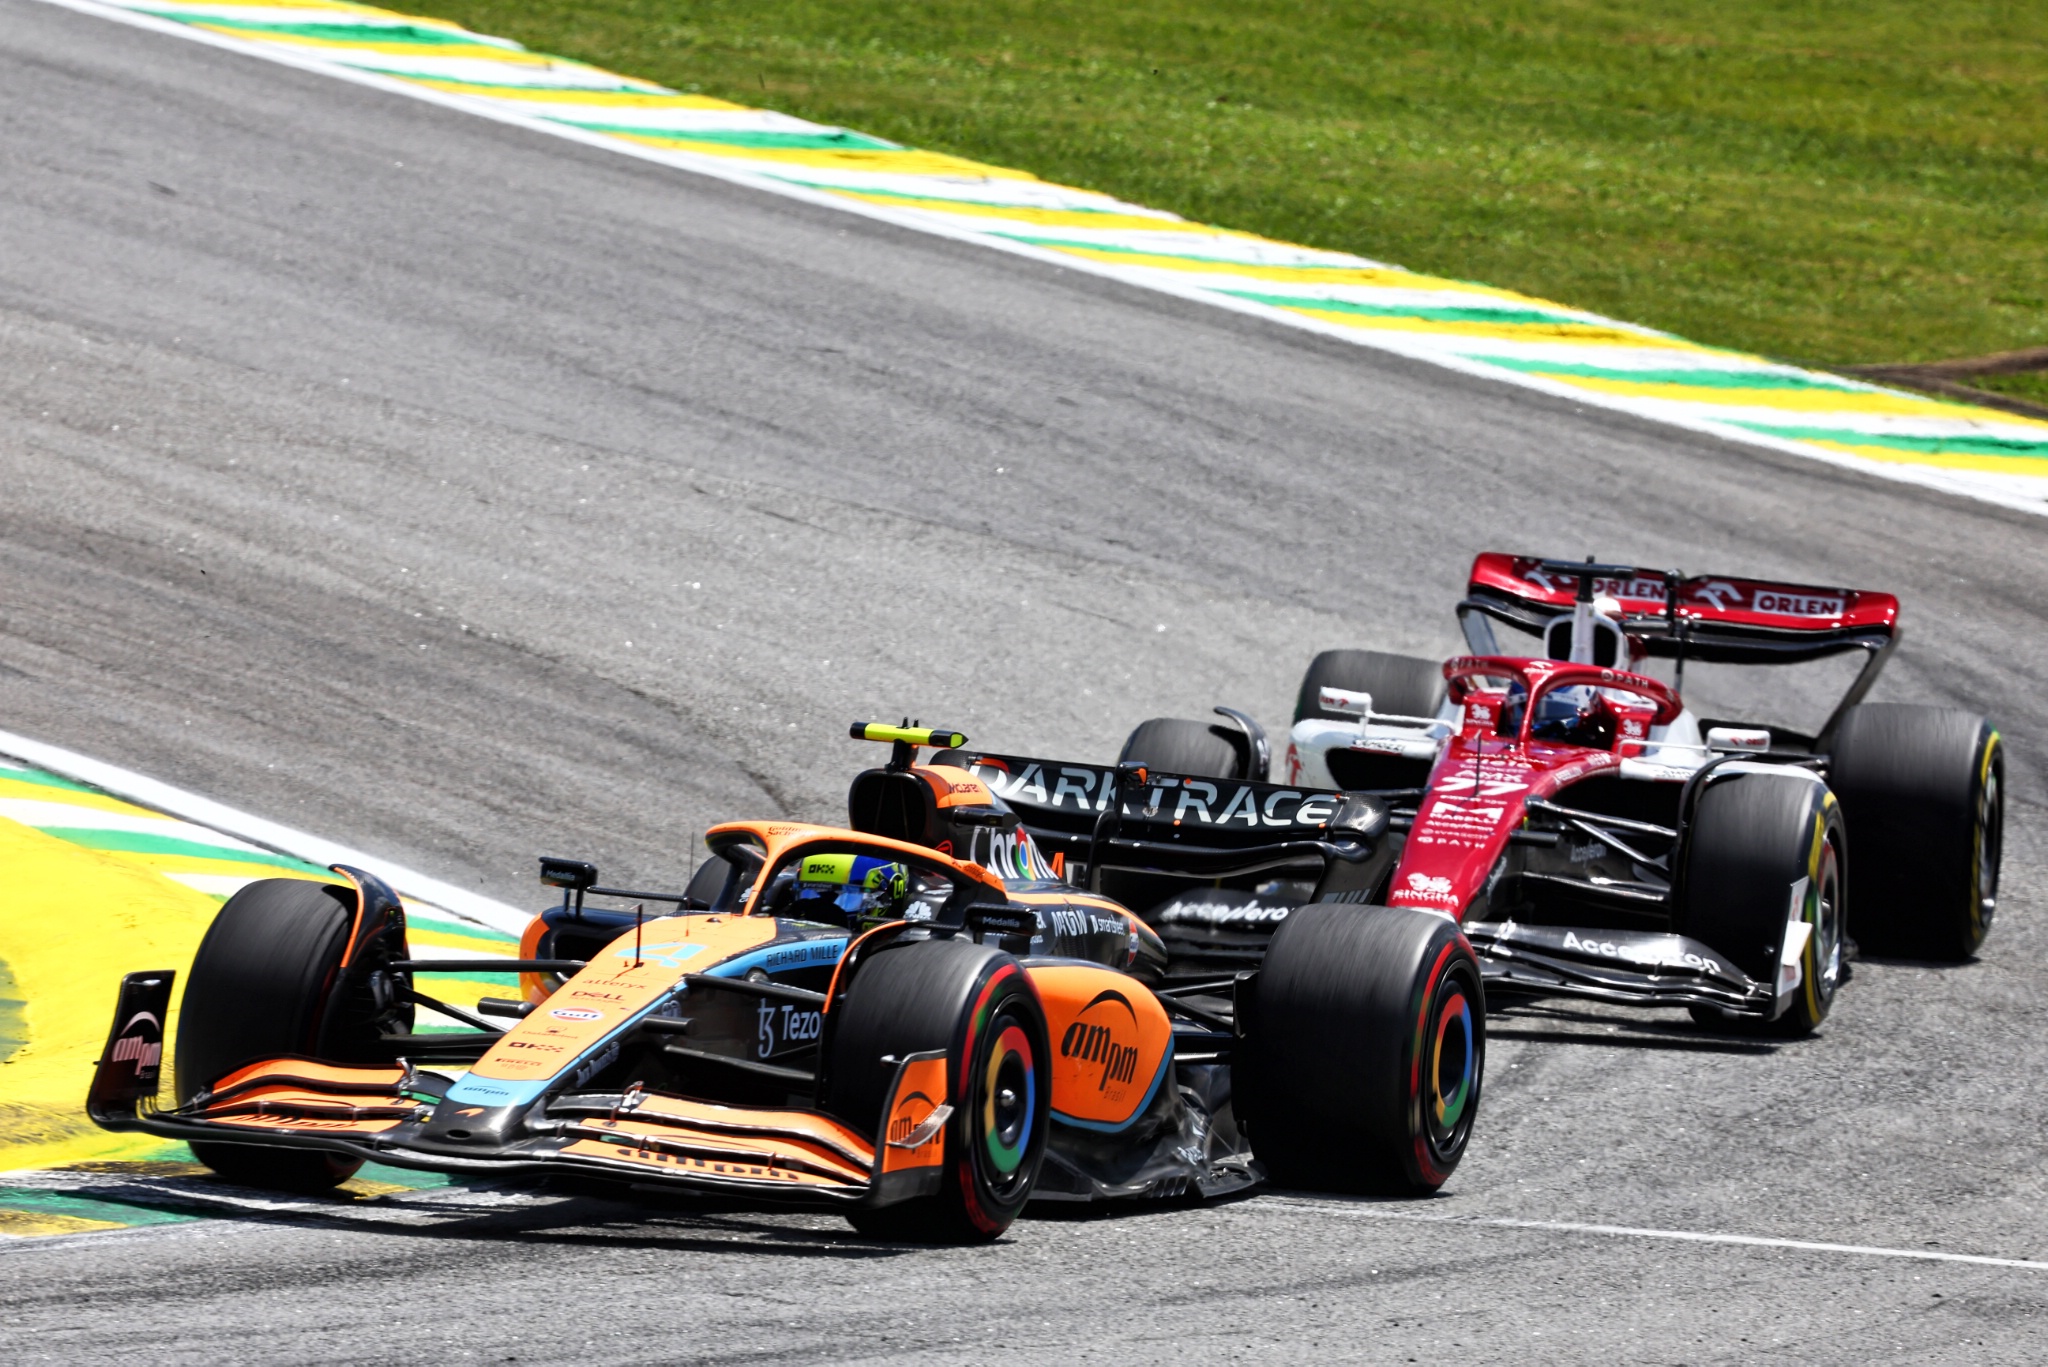 Rate the race: 2021 Sao Paulo Grand Prix Sprint Qualifying · RaceFans